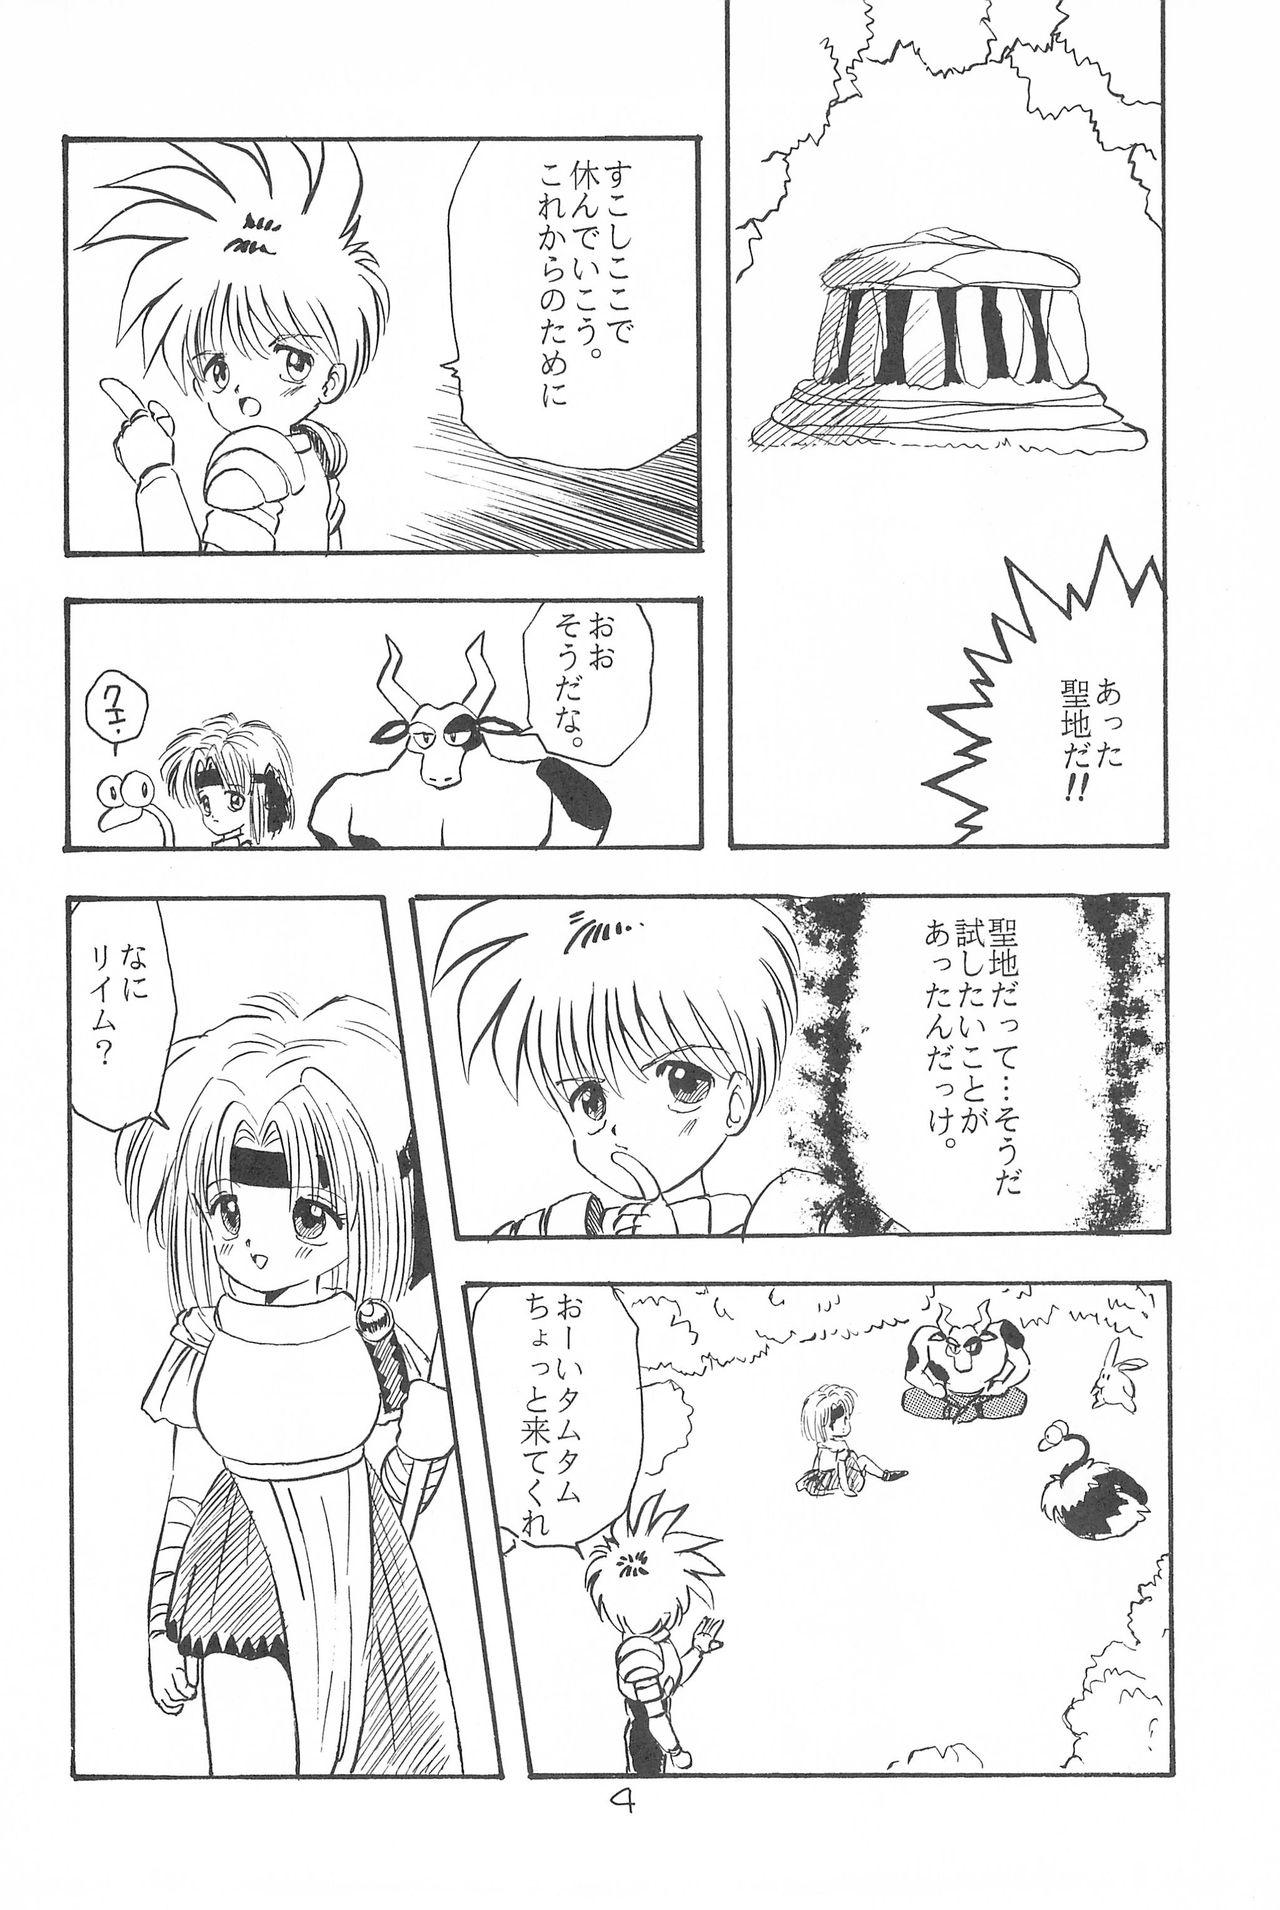 Gordibuena LITTLE GIRLS OF THE GAME CHARACTER SELECT-2 - Twinbee Live - Page 6